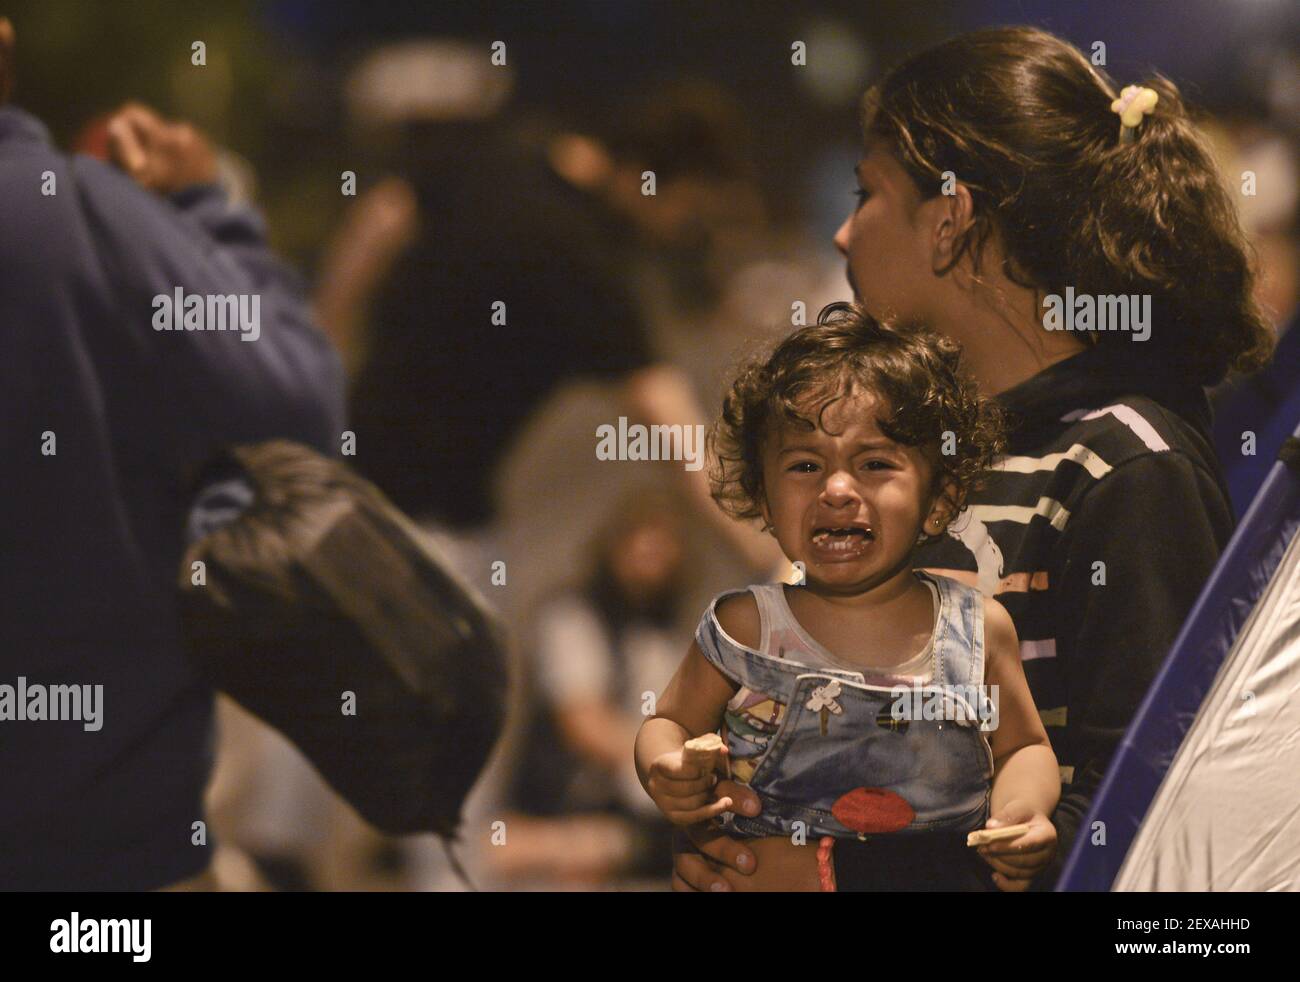 A migrant holding a crying child near the gates at the Serbia-Hungary border in Horgos, Serbia, on September 16, 2015. (Photo by Artur Widak) *** Please Use Credit from Credit Field *** Stock Photo